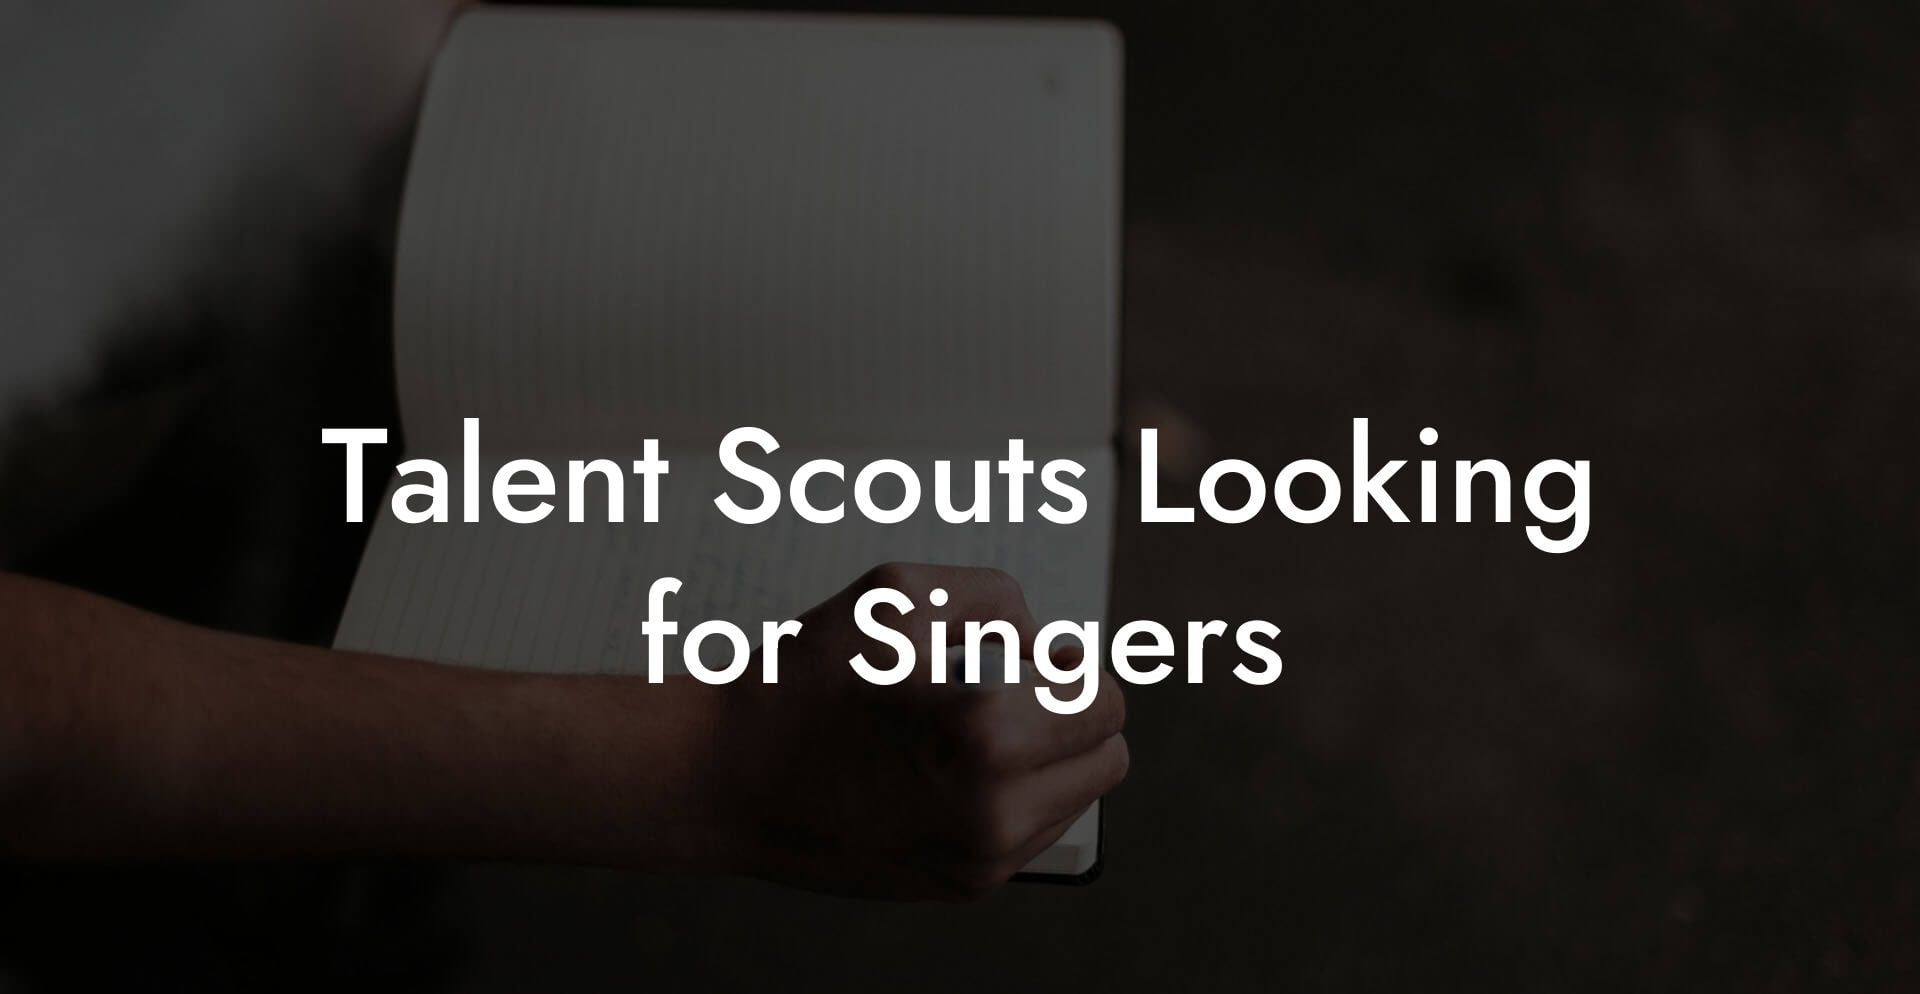 Talent Scouts Looking for Singers